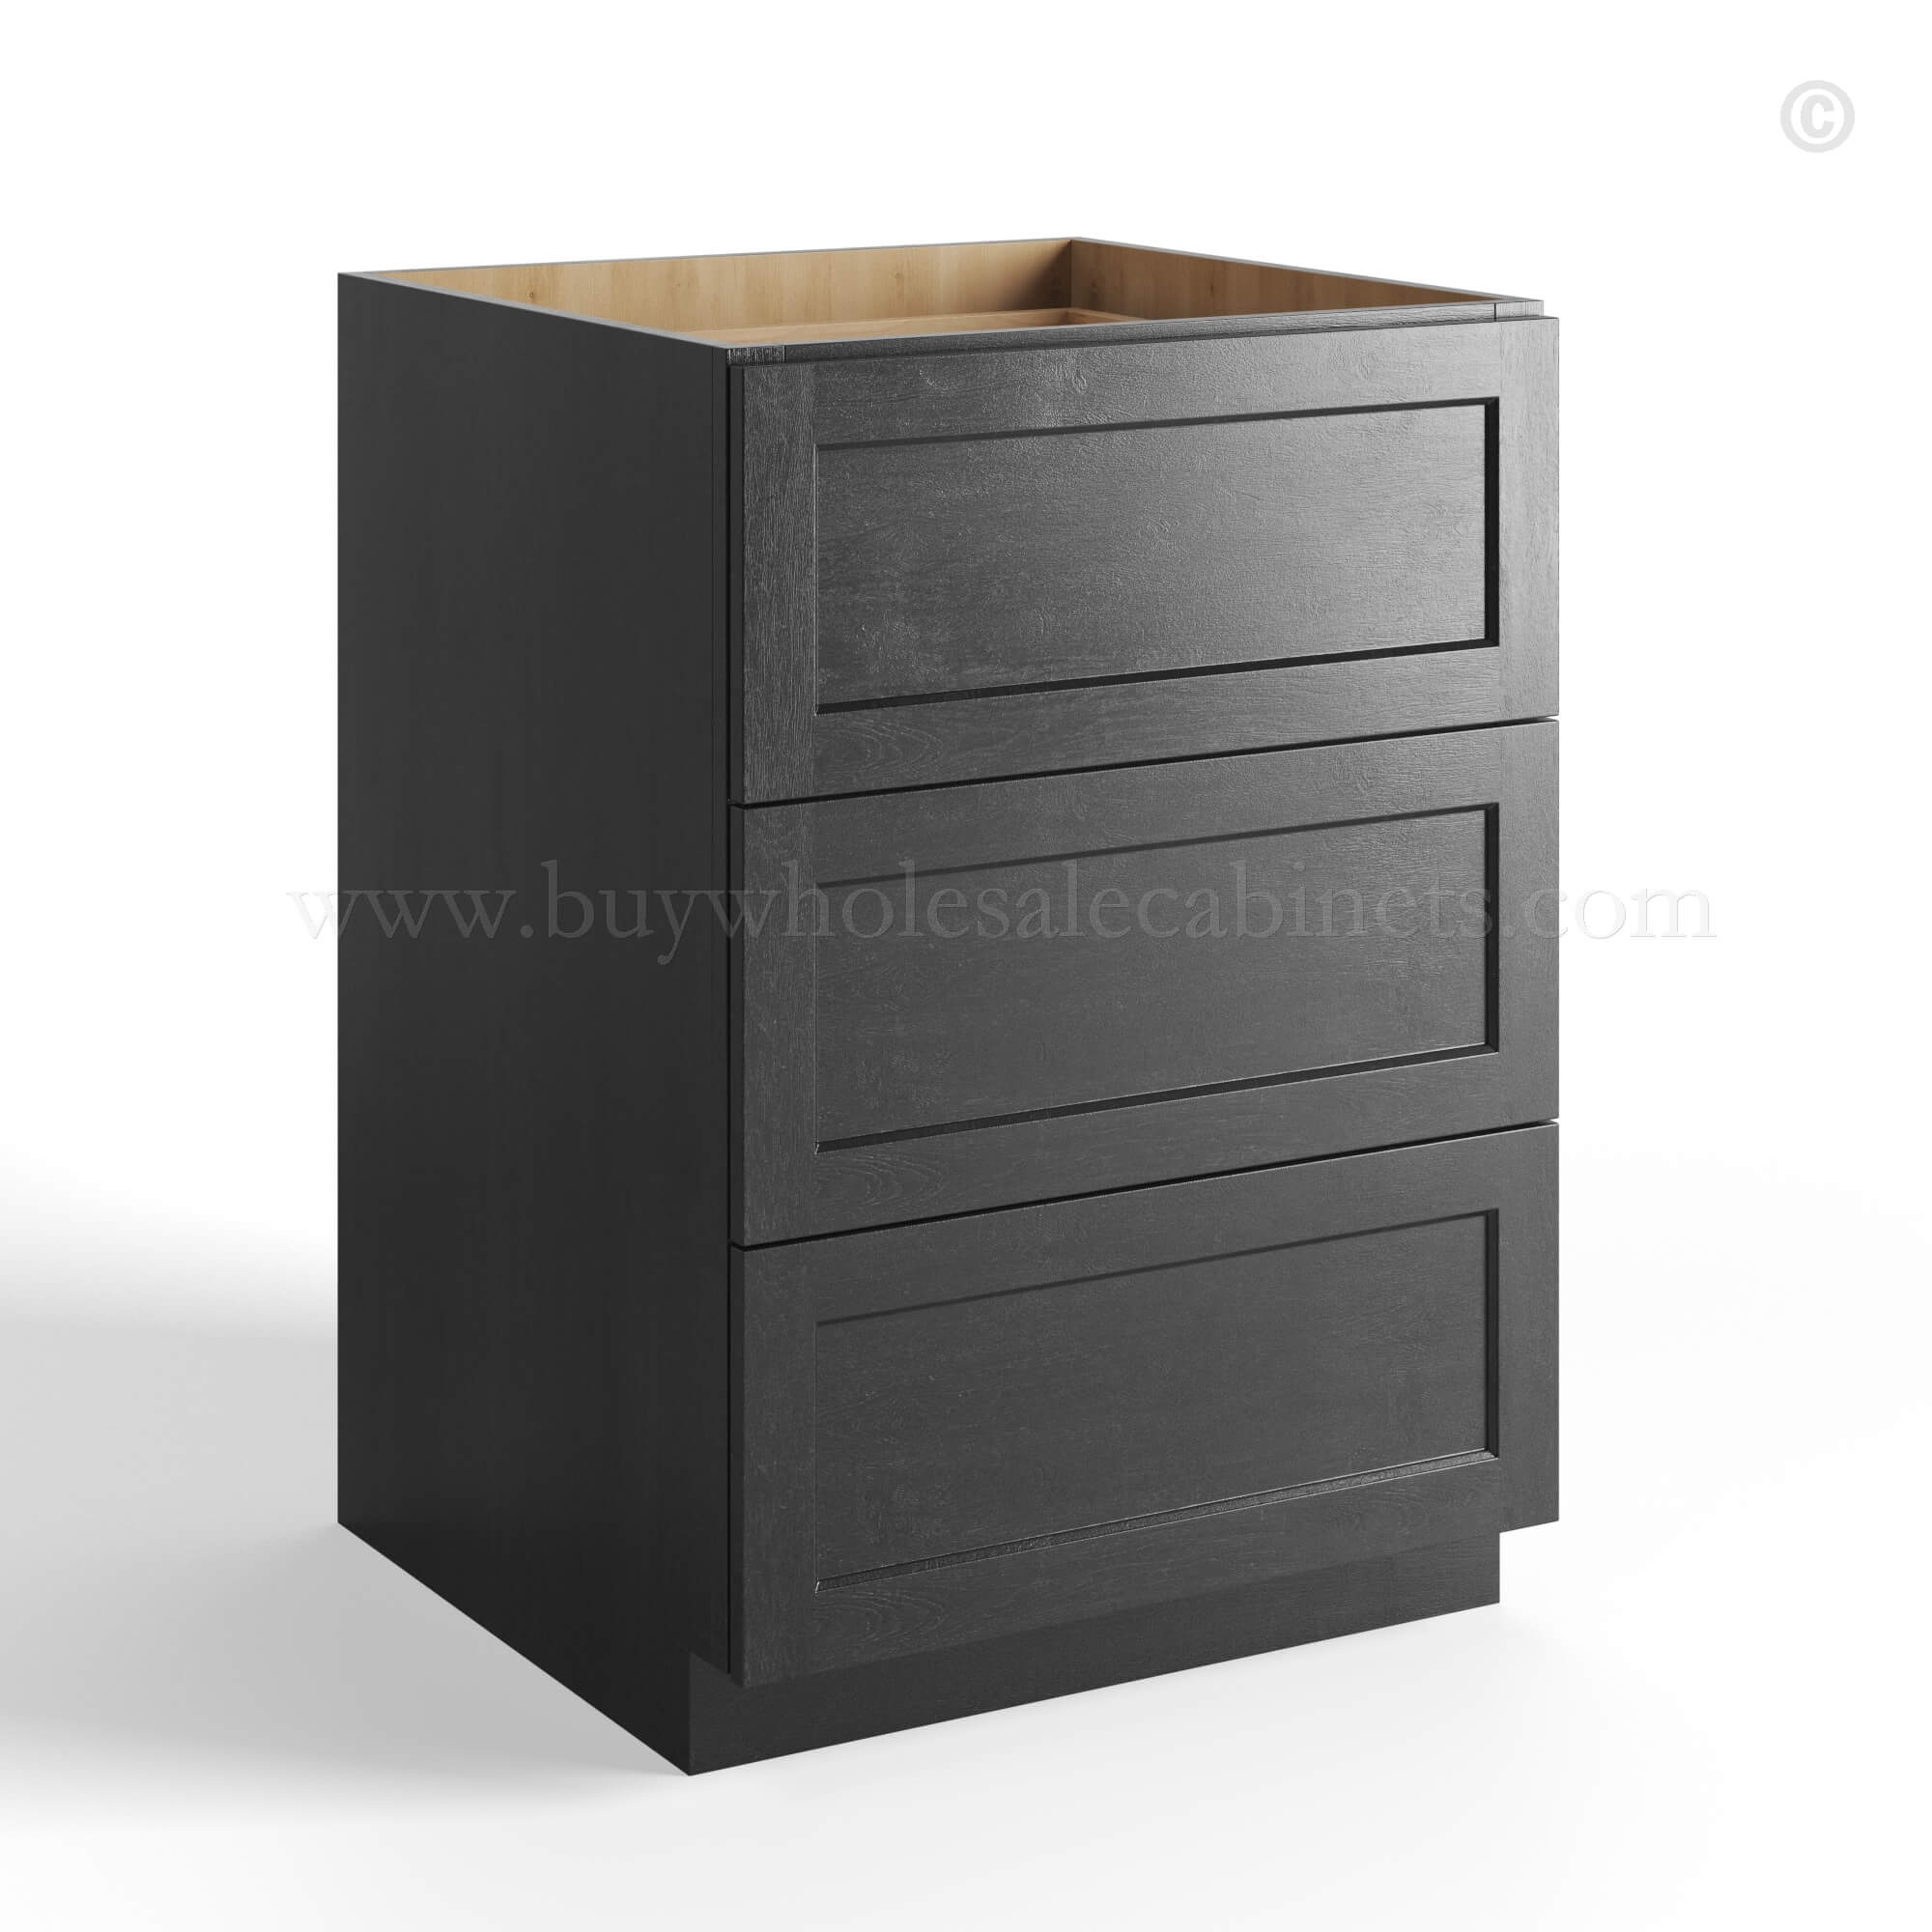 Charcoal Black Shaker Base cabinet with 3 Drawers, rta cabinets, wholesale cabinets